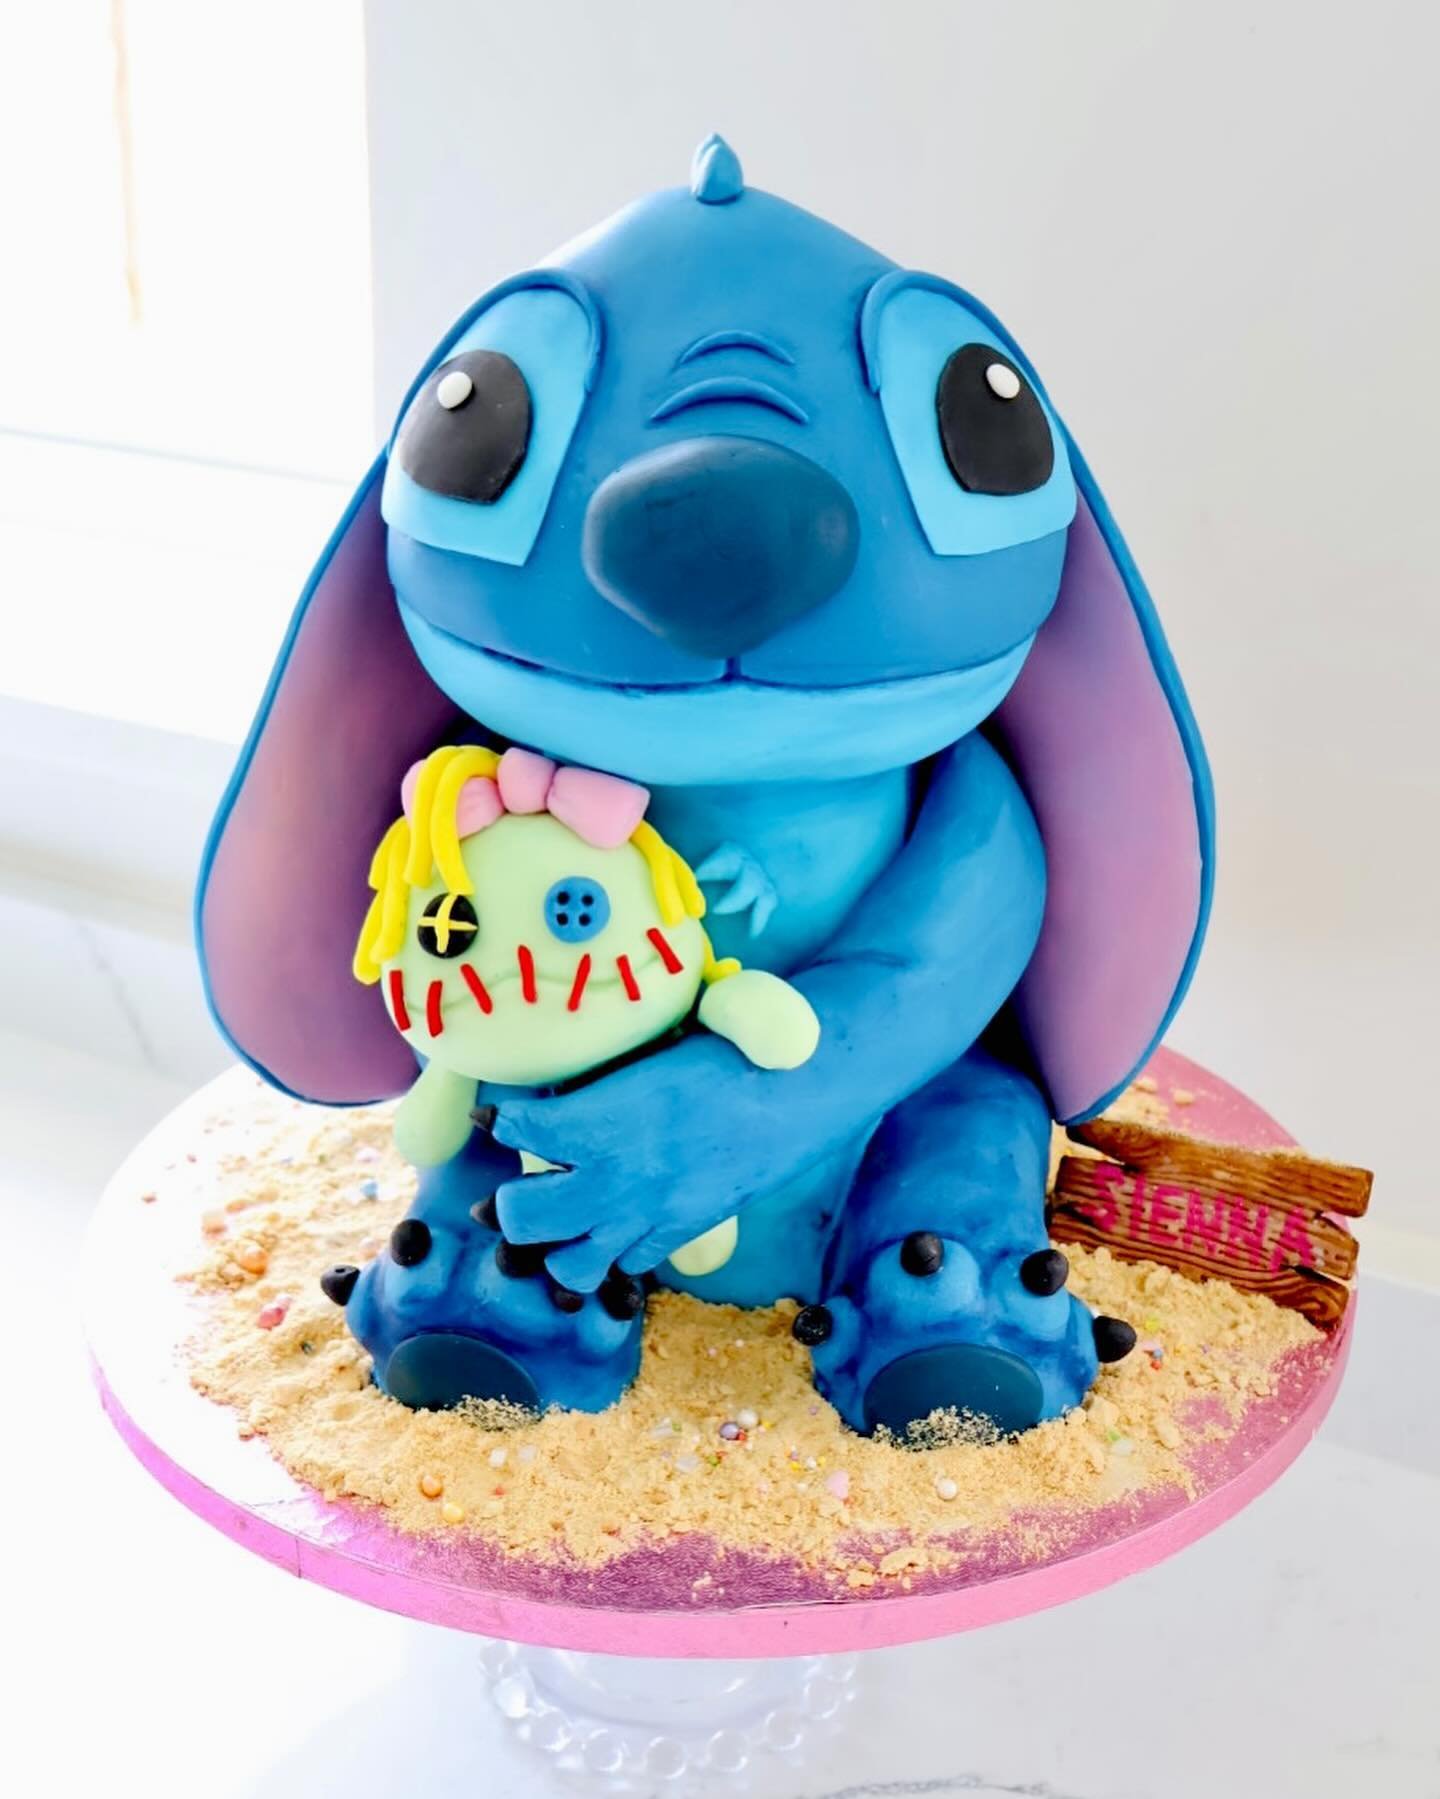 Throwback to when I made this Stitch Cake for my little cousin last year&hellip;I wonder what she&rsquo;s going to ask for this year 🙈🤣💕 @rachel_leah_200 

#stitch #stitchcake #stitchparty #cakeart #cakeartist #cakedecorating #cakedecorator #3dcak